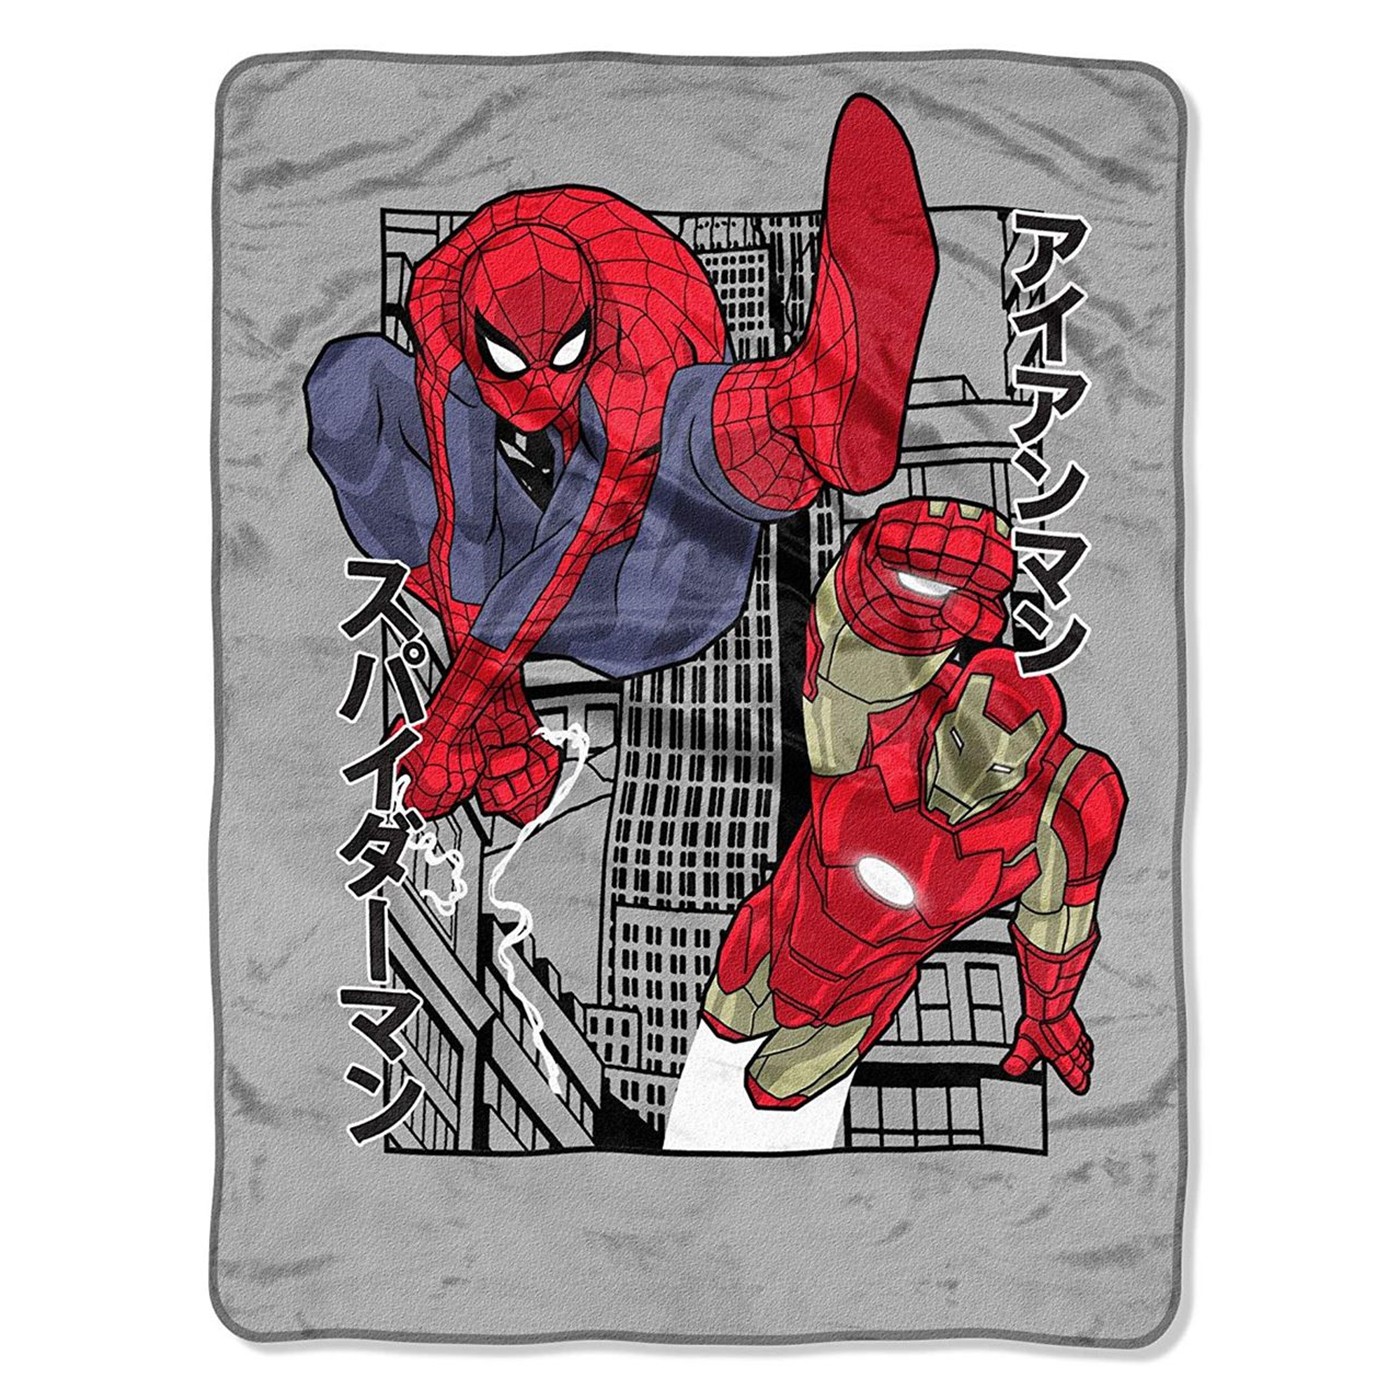 Avengers Spider-Man and Iron Man Power City Blanket